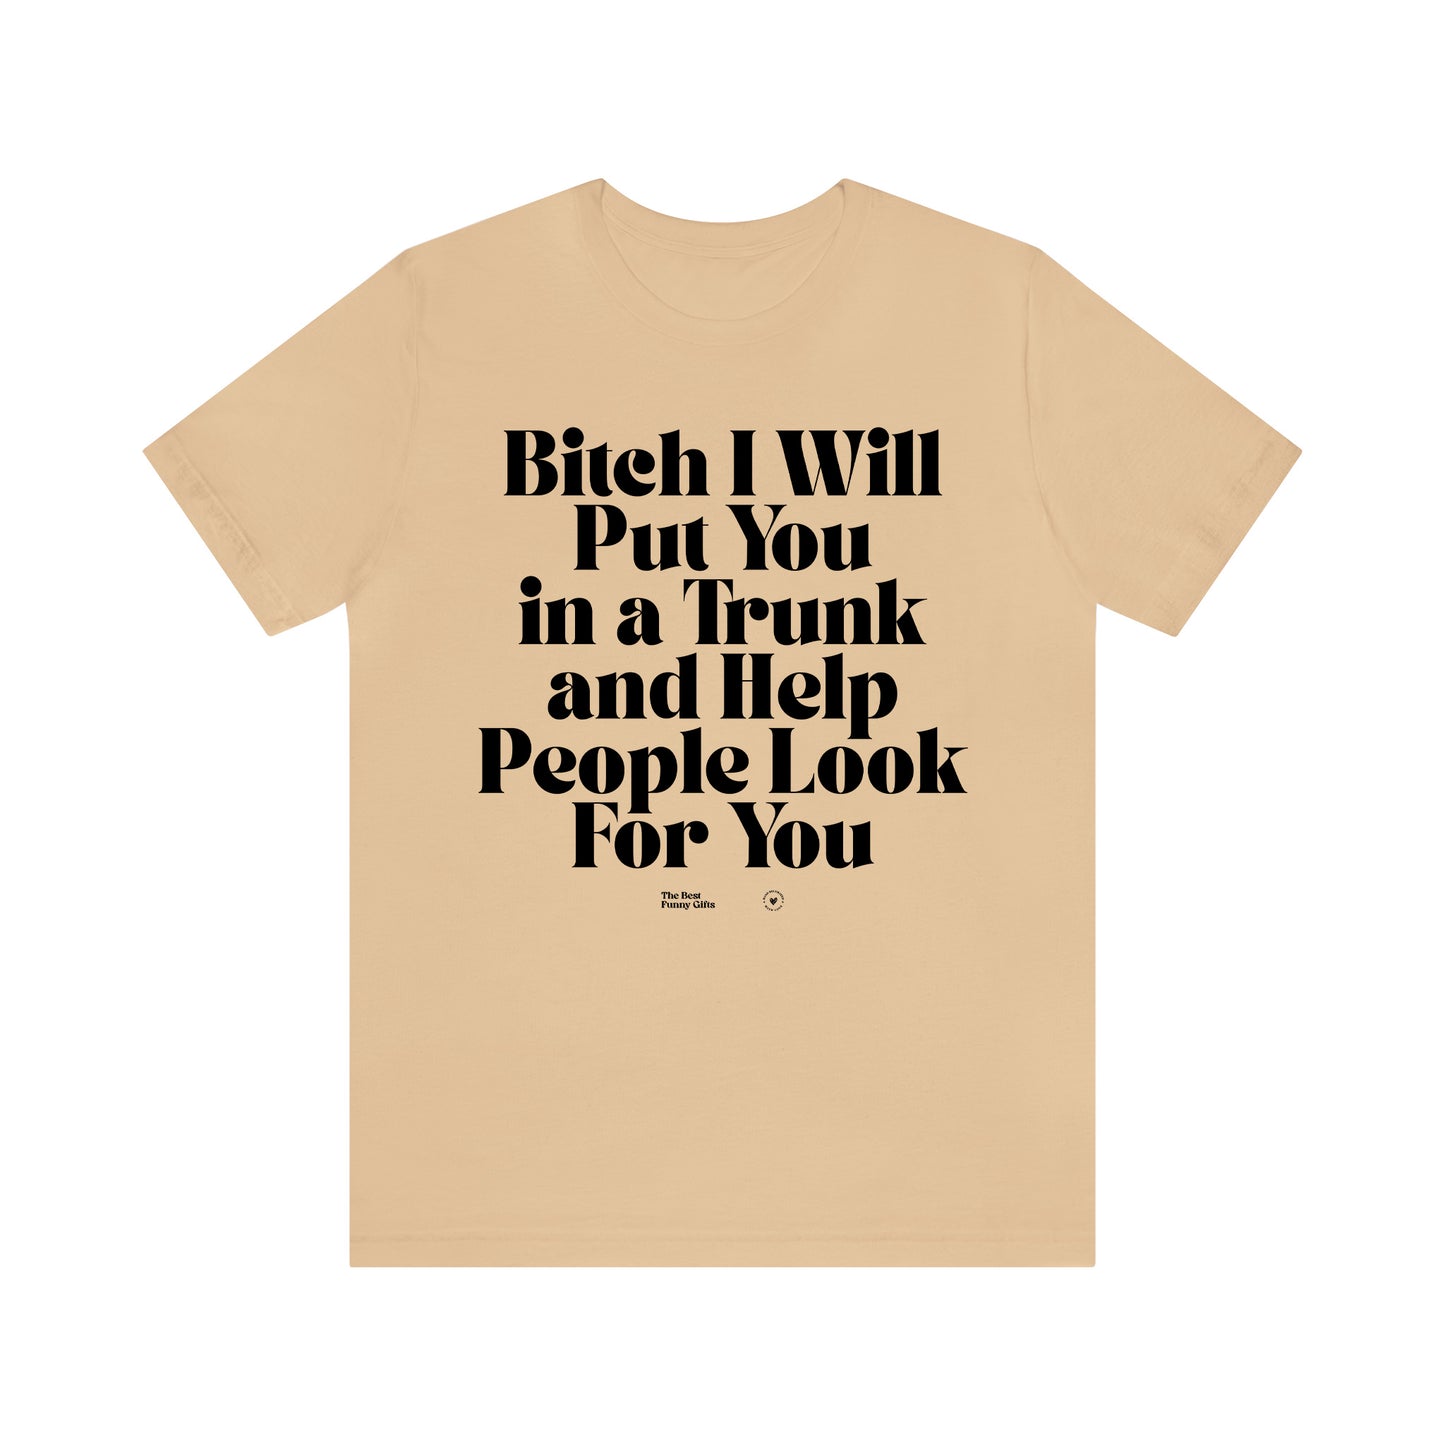 Funny Shirts for Women - Bitch I Will Put You in a Trunk and Help People Look for You - Women’s T Shirts